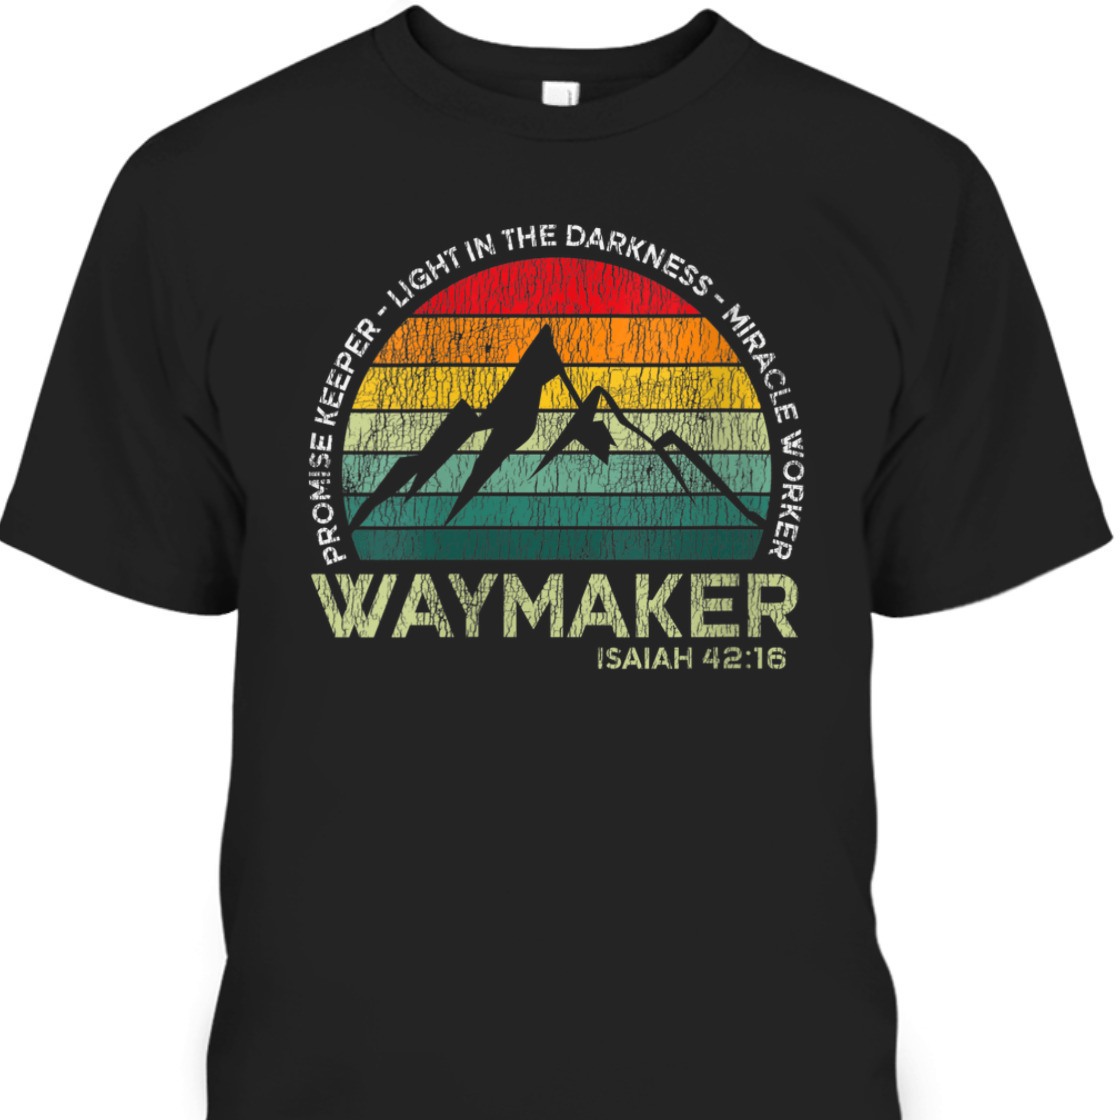 Waymaker Promise Keeper Light In The Darkness T-Shirt Miracle Worker Isaiah 42:16